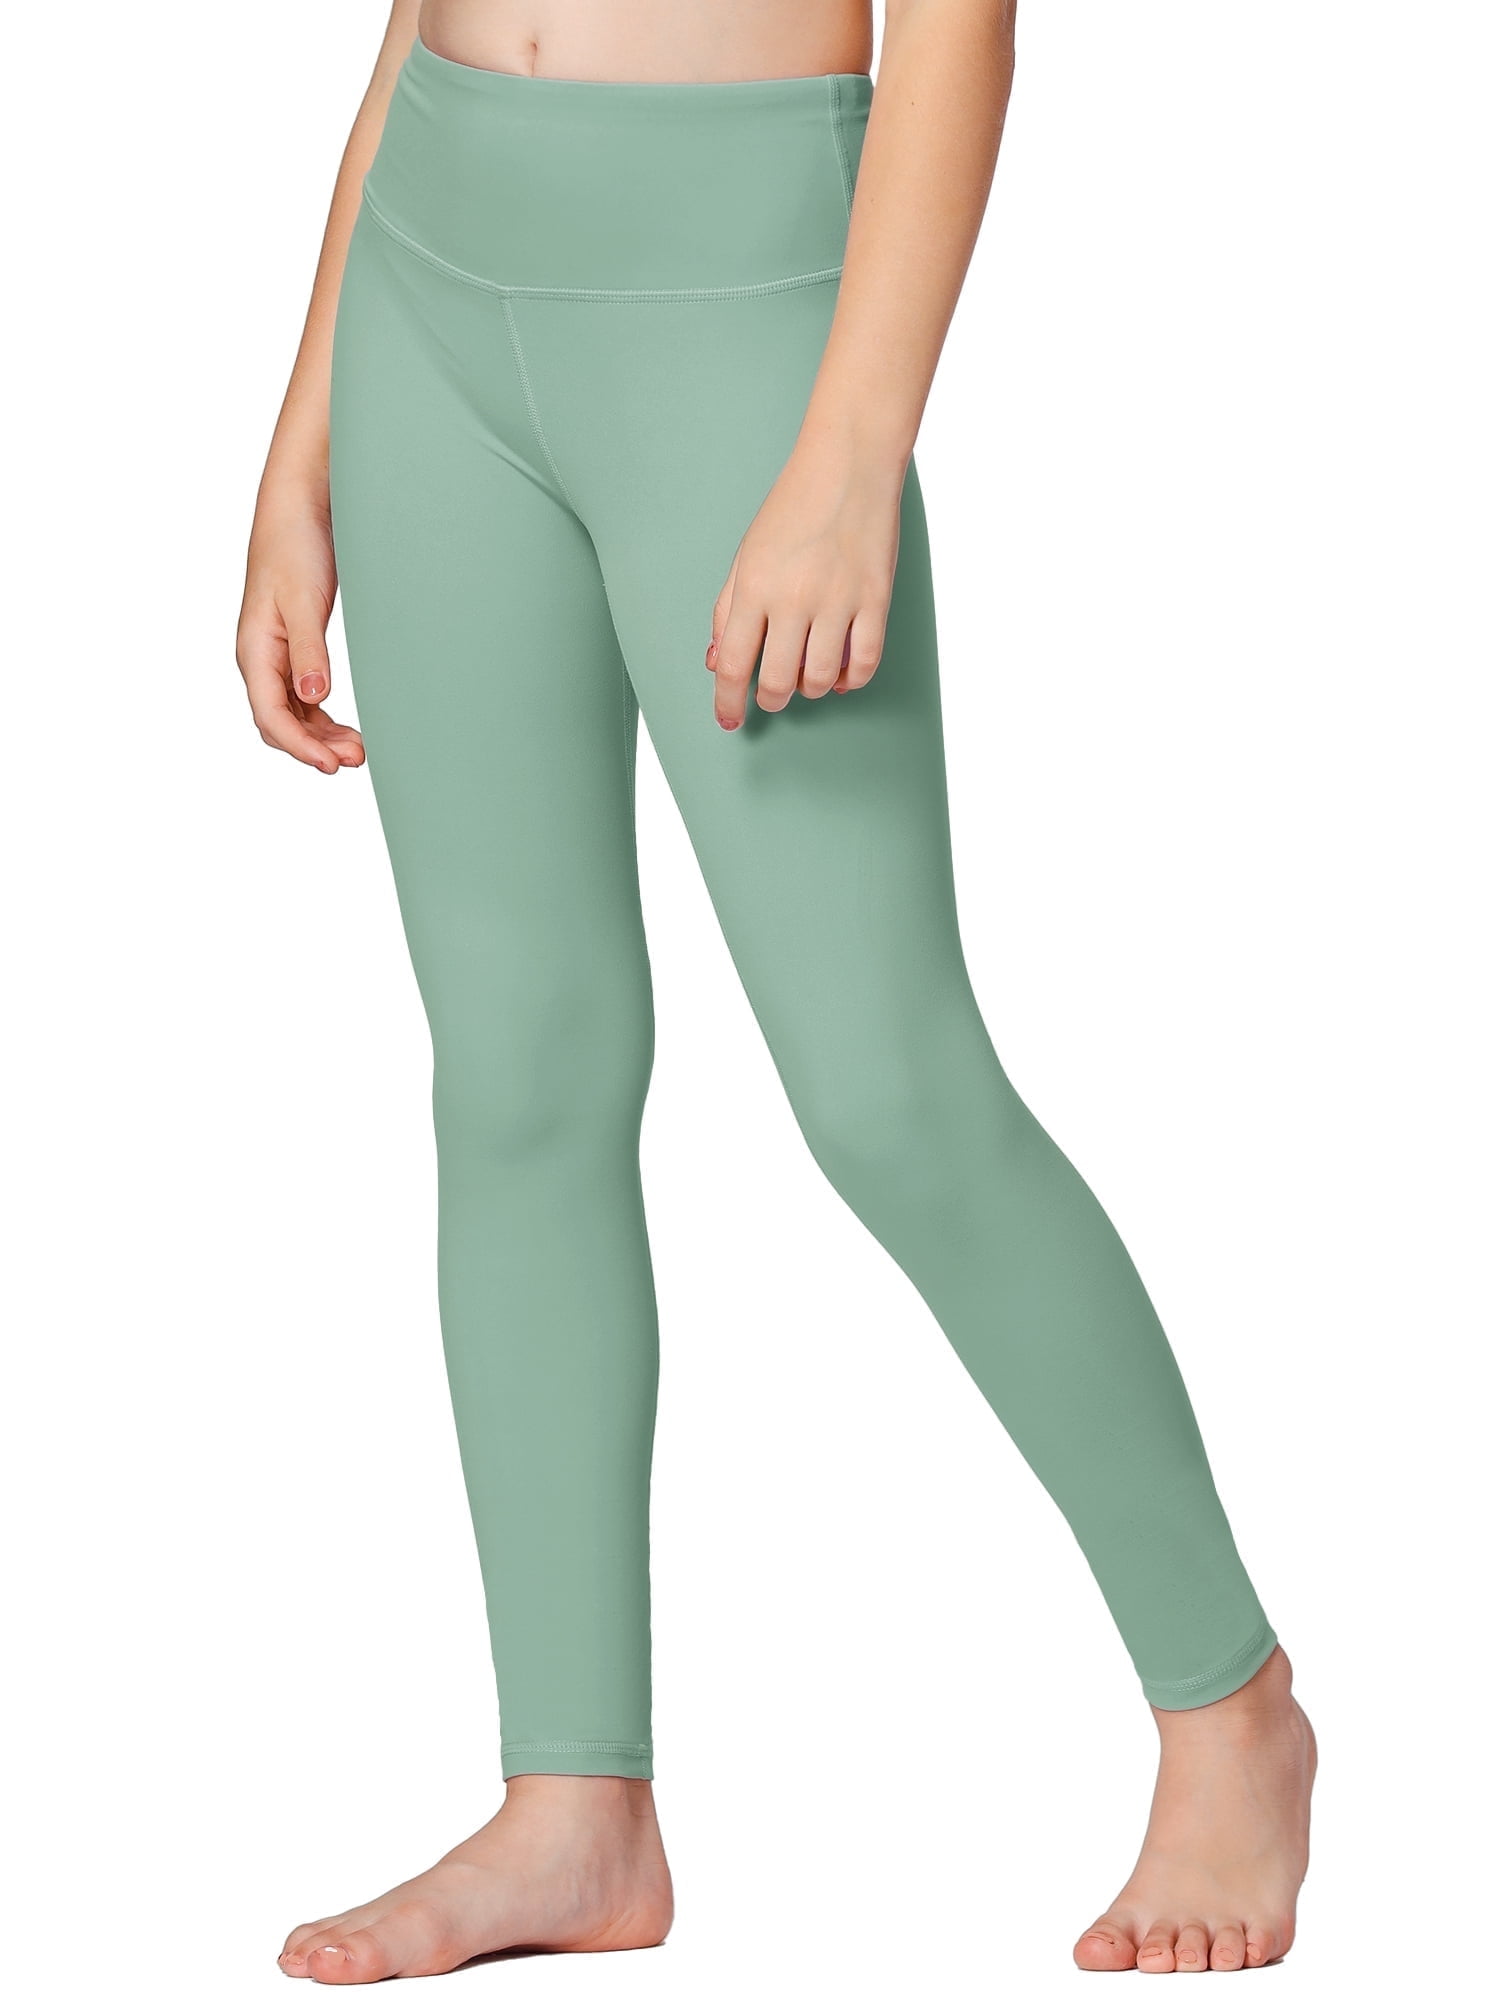 Training Pocket 7/8 Tight in Forest Green, Gym leggings